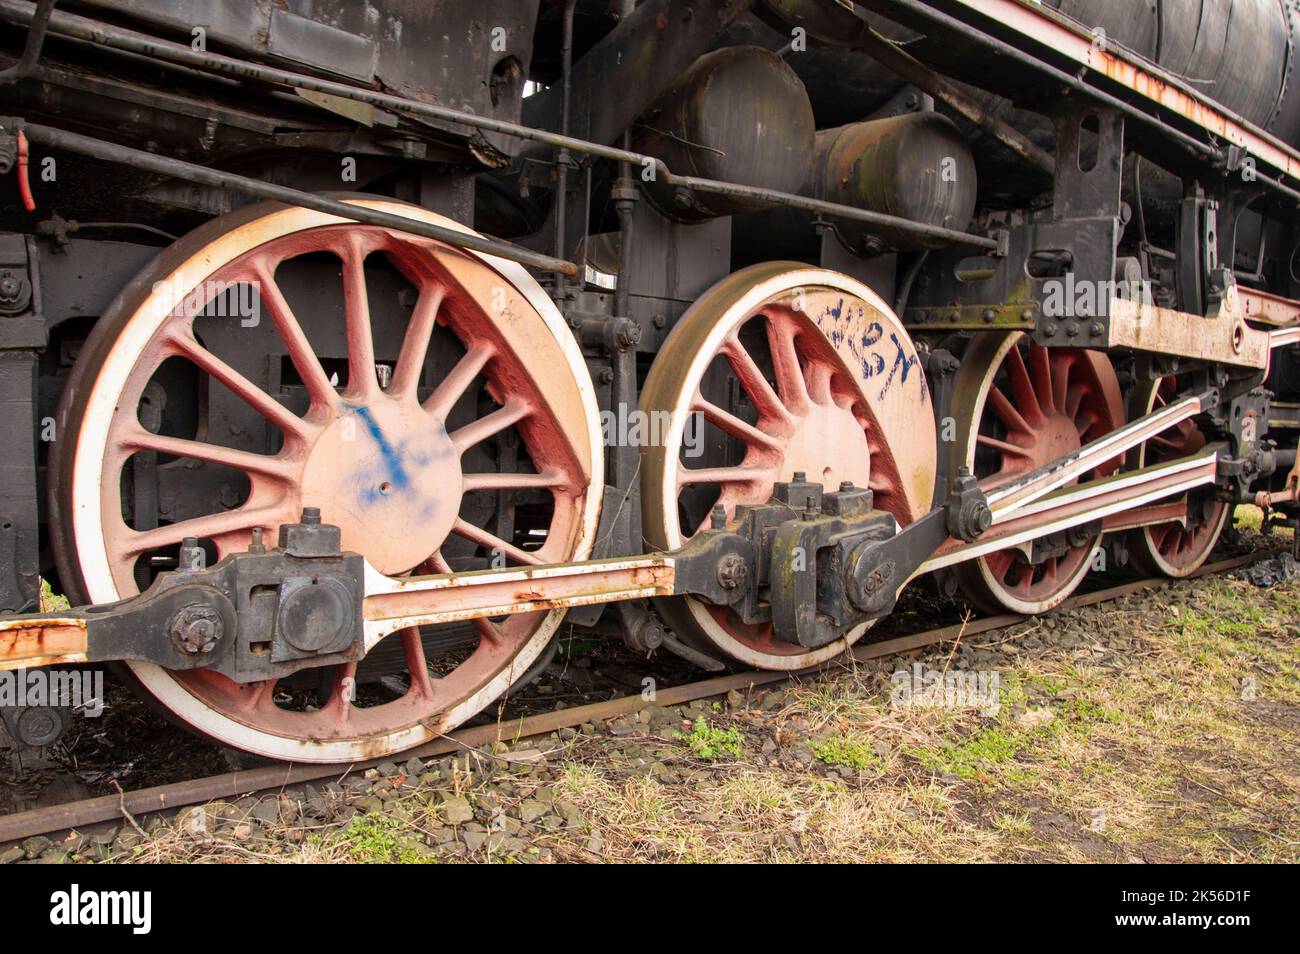 Drive transmission mechanism in a historic and damaged steam locomotive standing on a sidetrack. Stock Photo